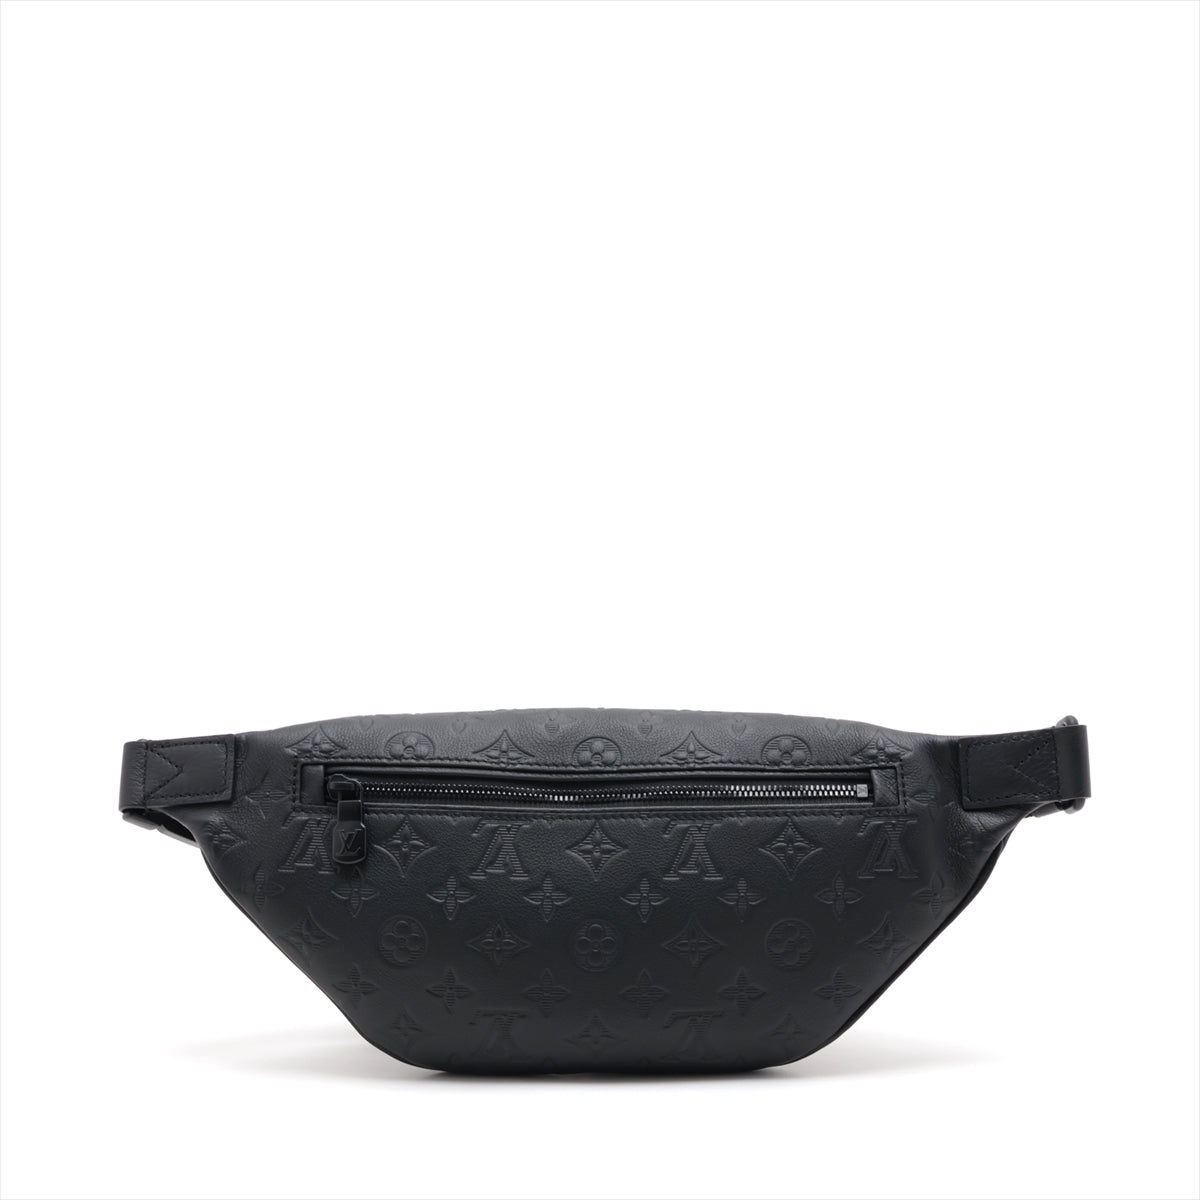 Louis Vuitton Monogram Shadow Discovery Bum Bag M44388 There was an RFID response